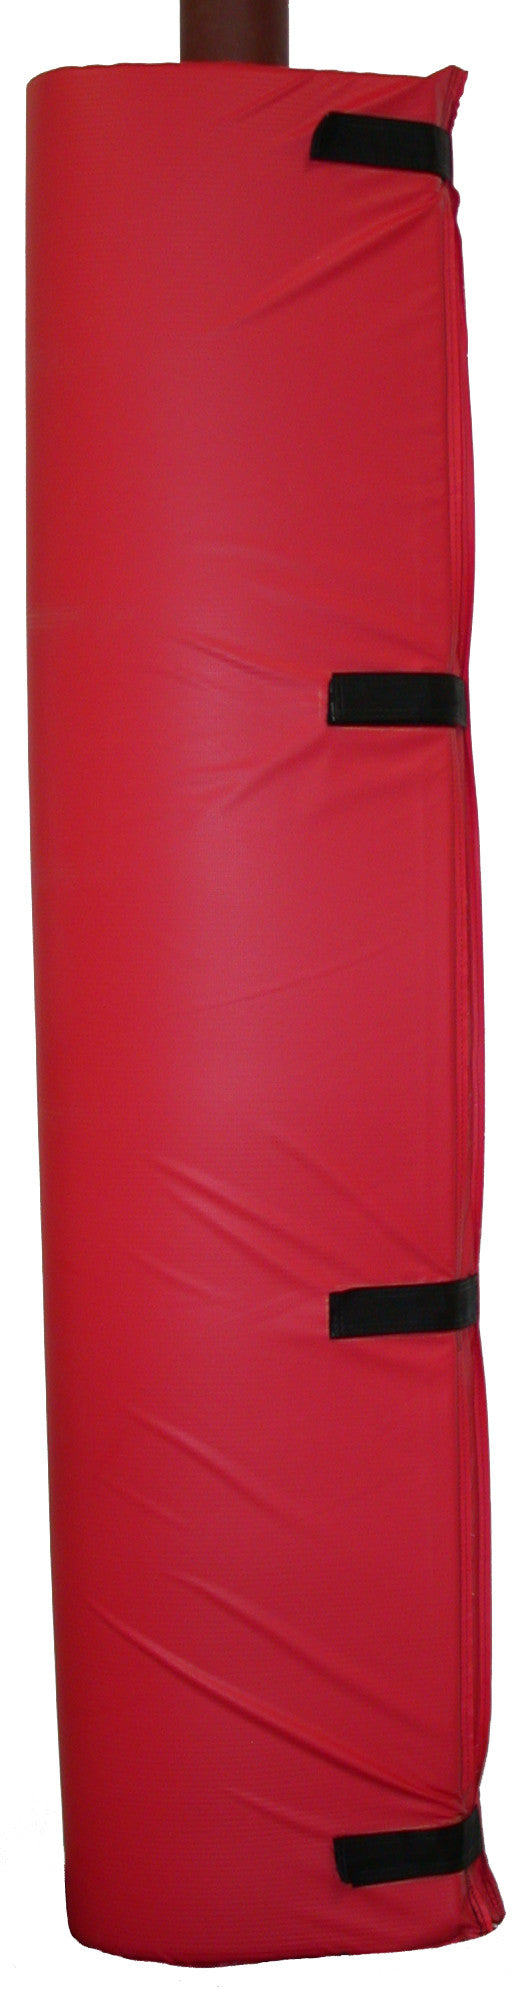 PADR-red vinyl cover post pad polyfoam filled